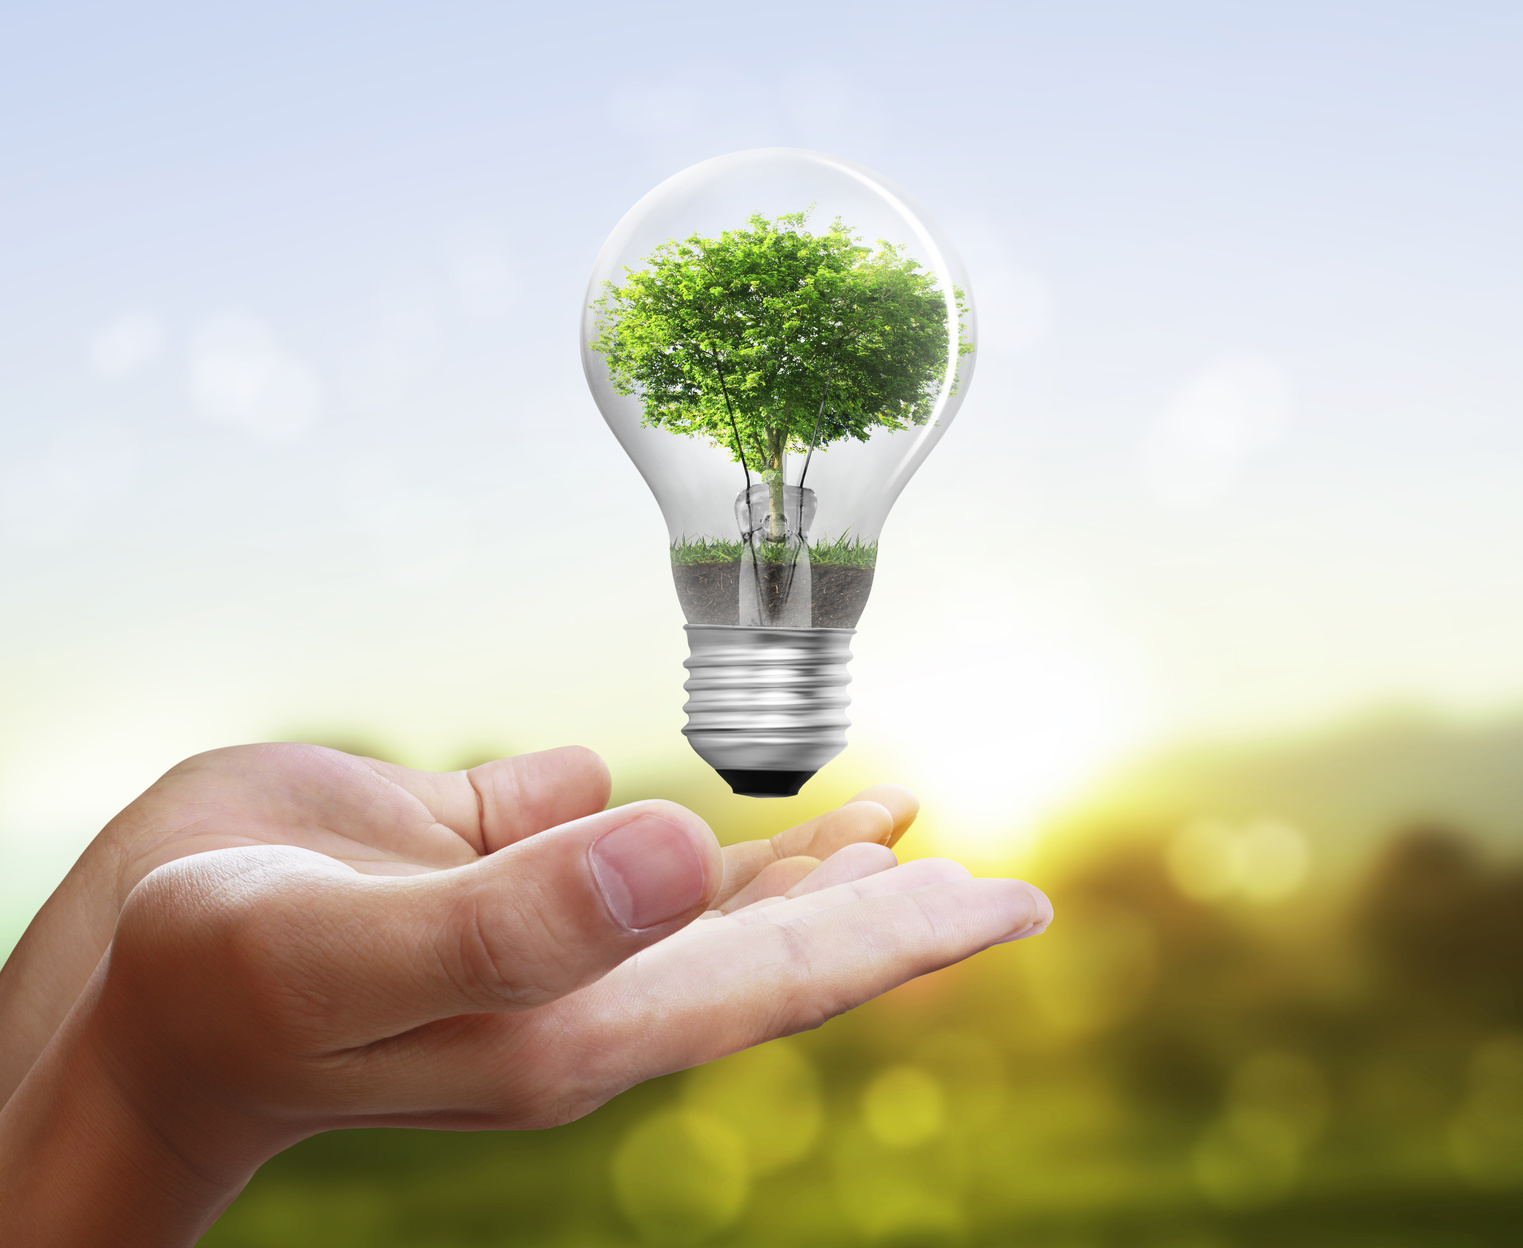 write a speech highlighting the importance of conserving energy